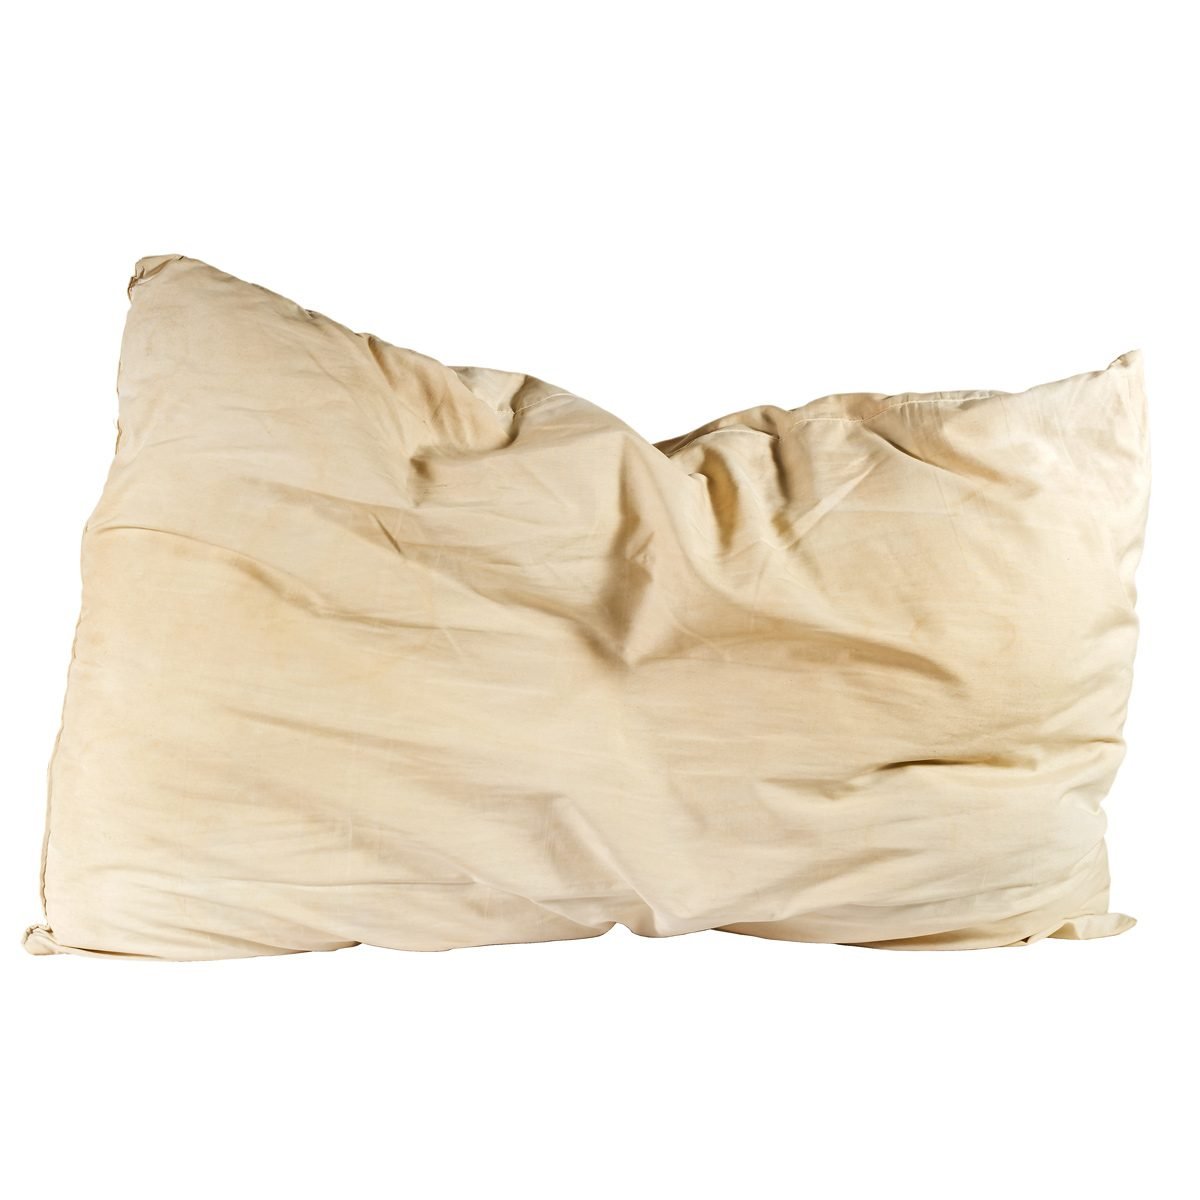 How To Dispose Of Your Old Pillows The Eco Hub | art-kk.com